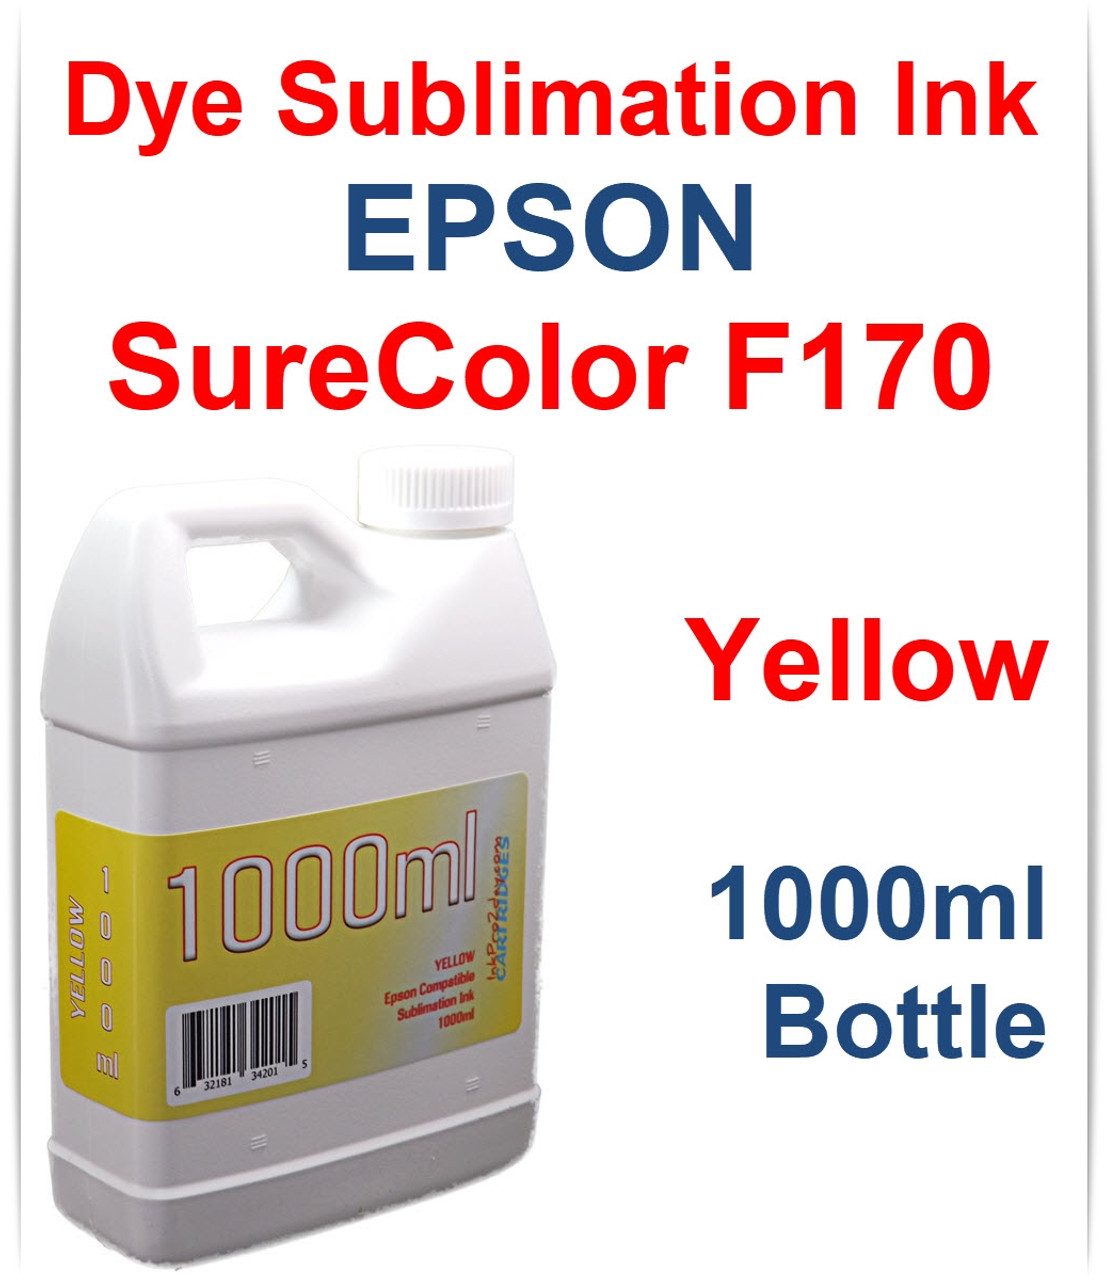 Yellow 1000ml bottle Dye Sublimation Ink for EPSON SureColor F170 printer